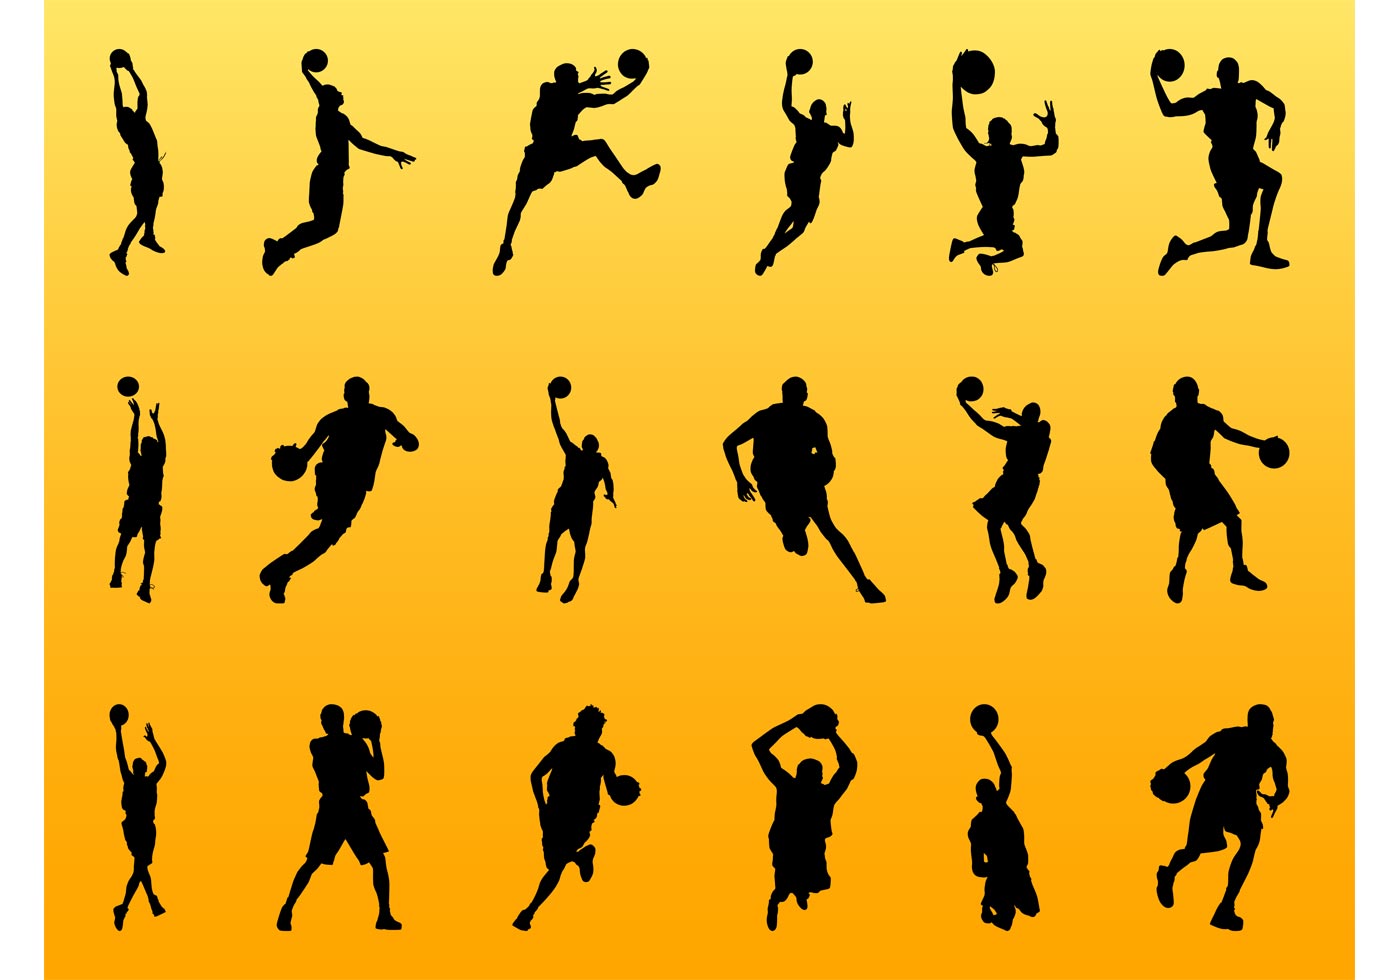 Basketball Player Silhouettes - Download Free Vector Art, Stock